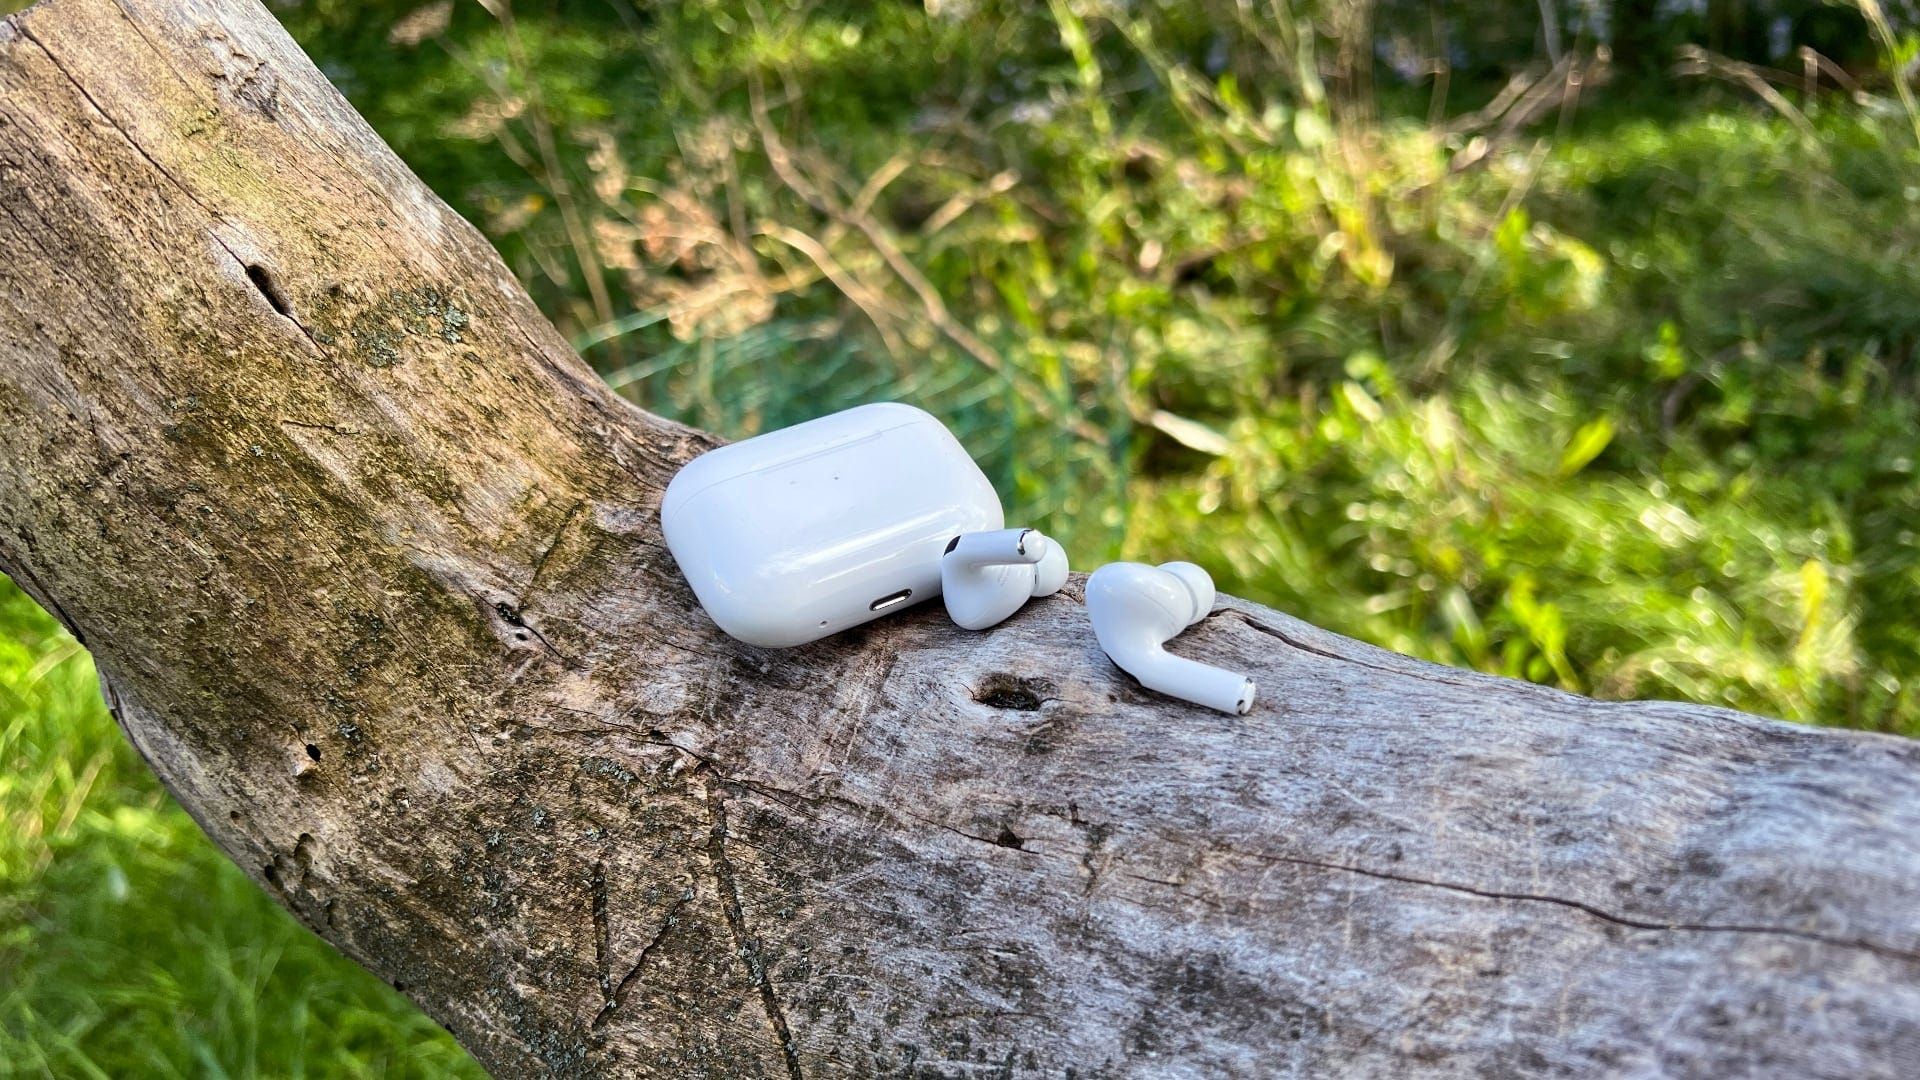 Apple AirPods Pro (2nd Gen) Review: The Best Earbuds for Apple Fans